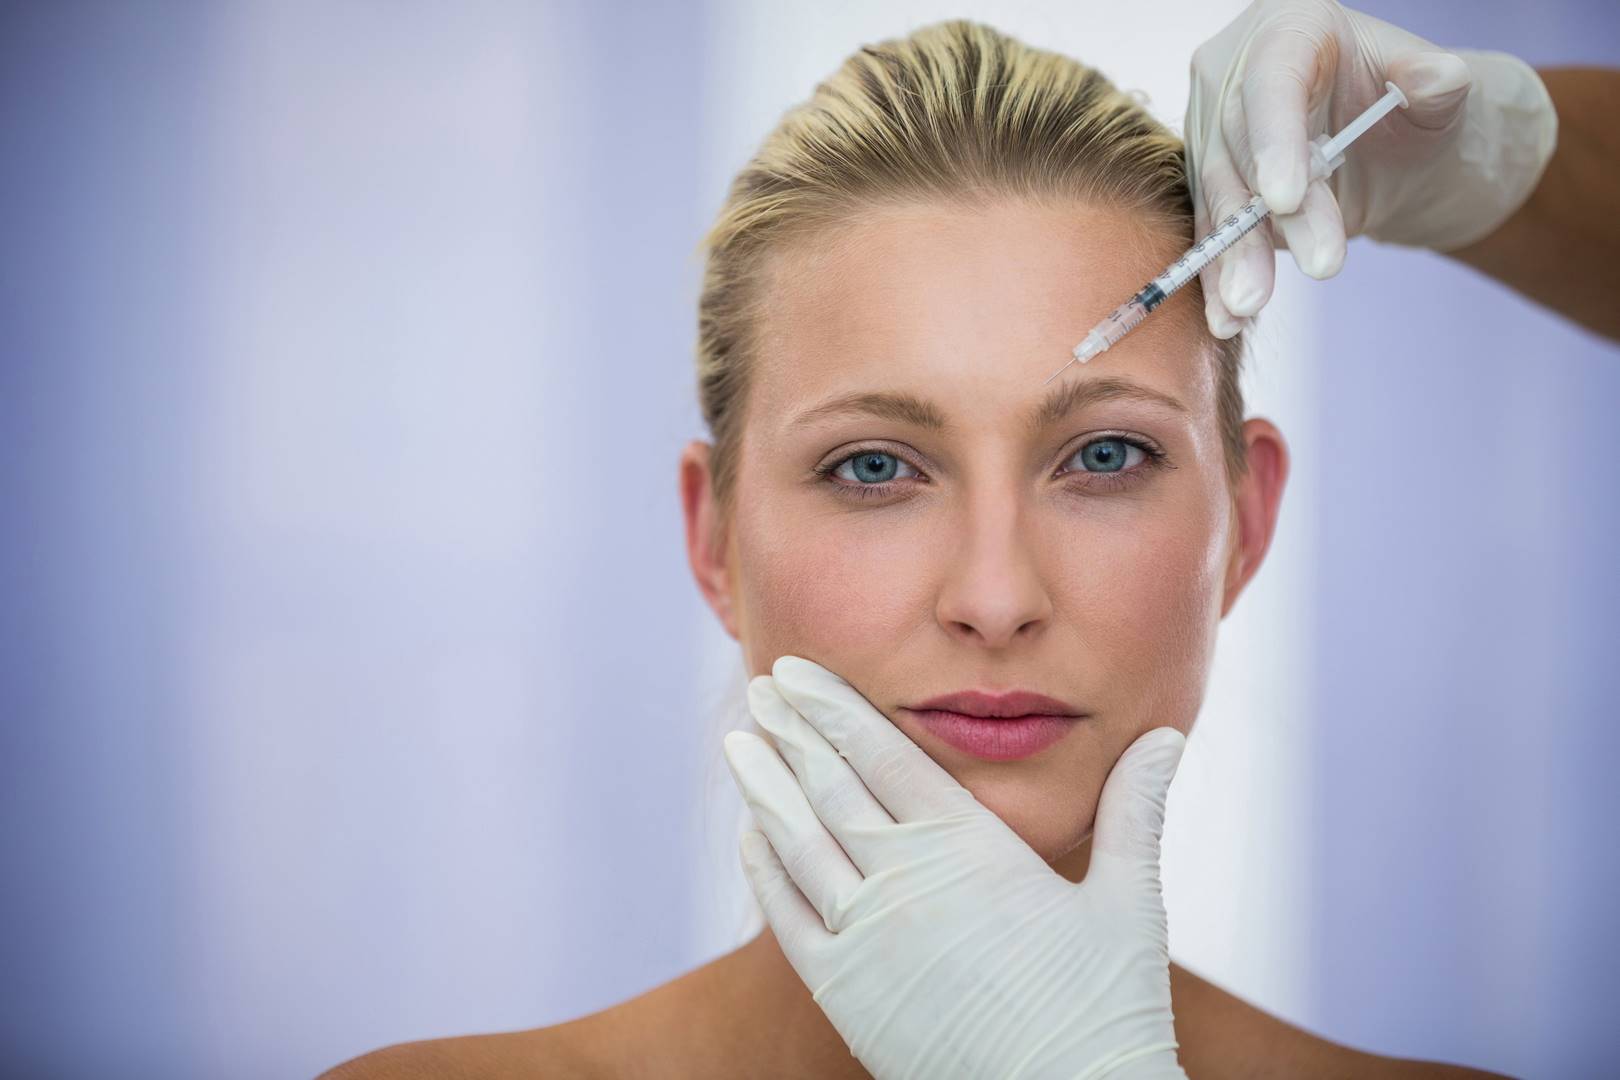 How to Choose Between Botox and Dysport?